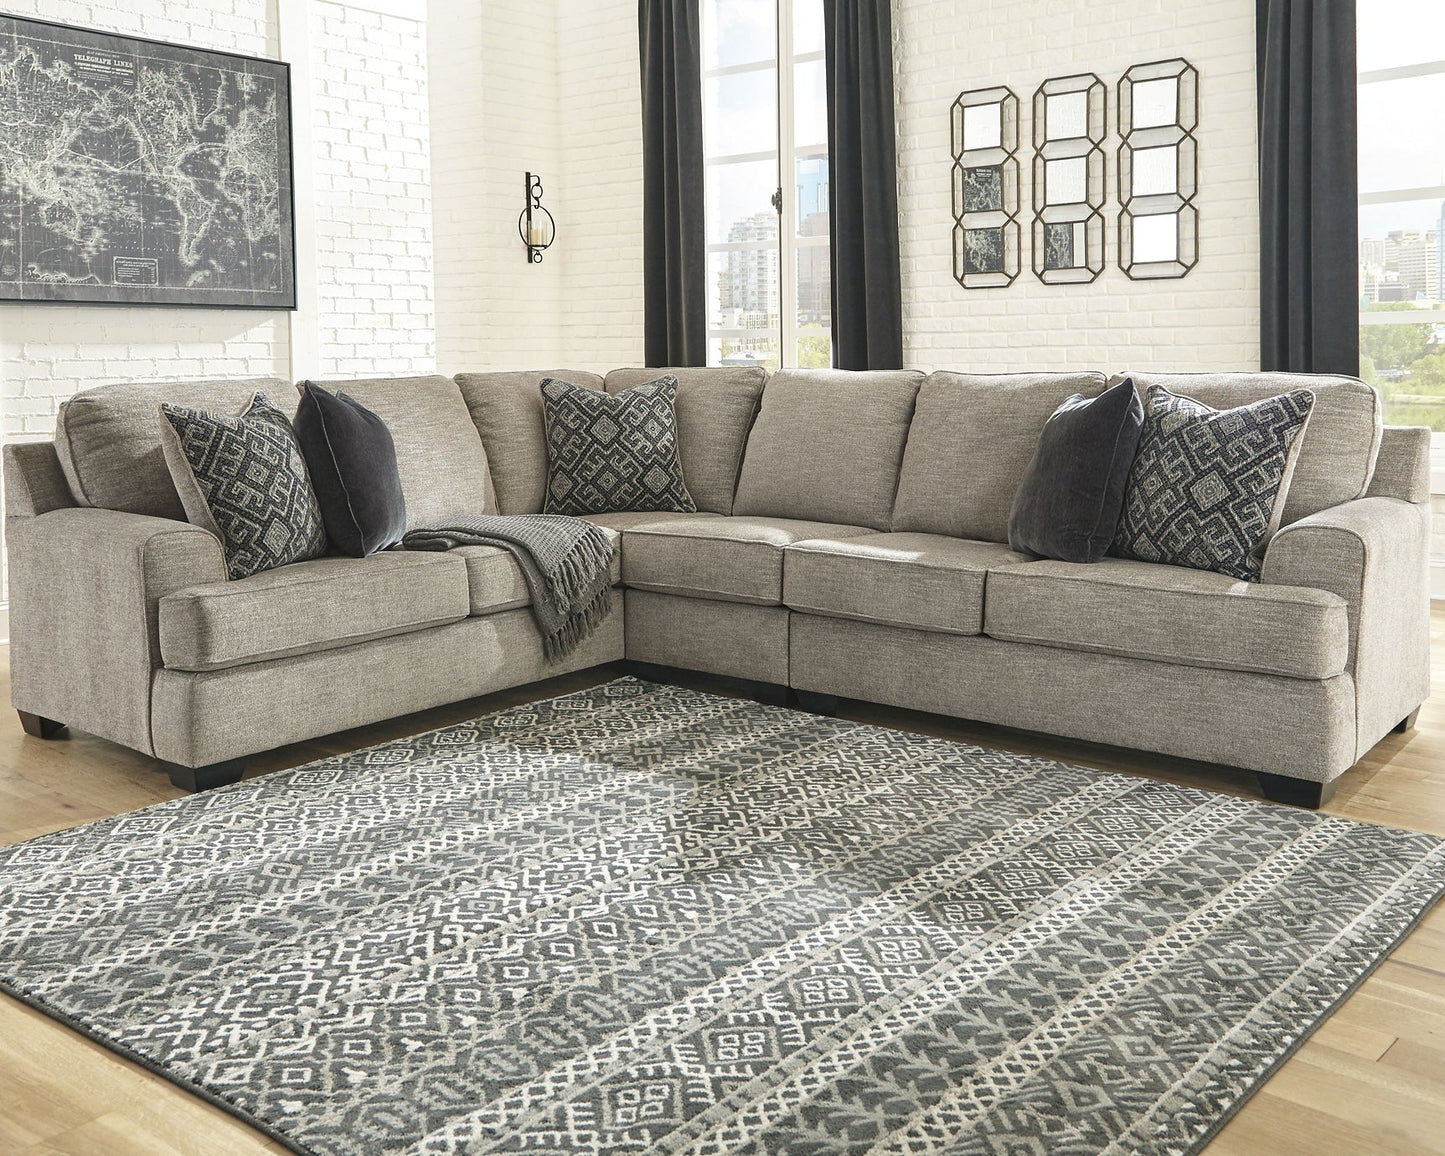 Bovarian 3-Piece Sectional with Ottoman Rent Wise Rent To Own Jacksonville, Florida